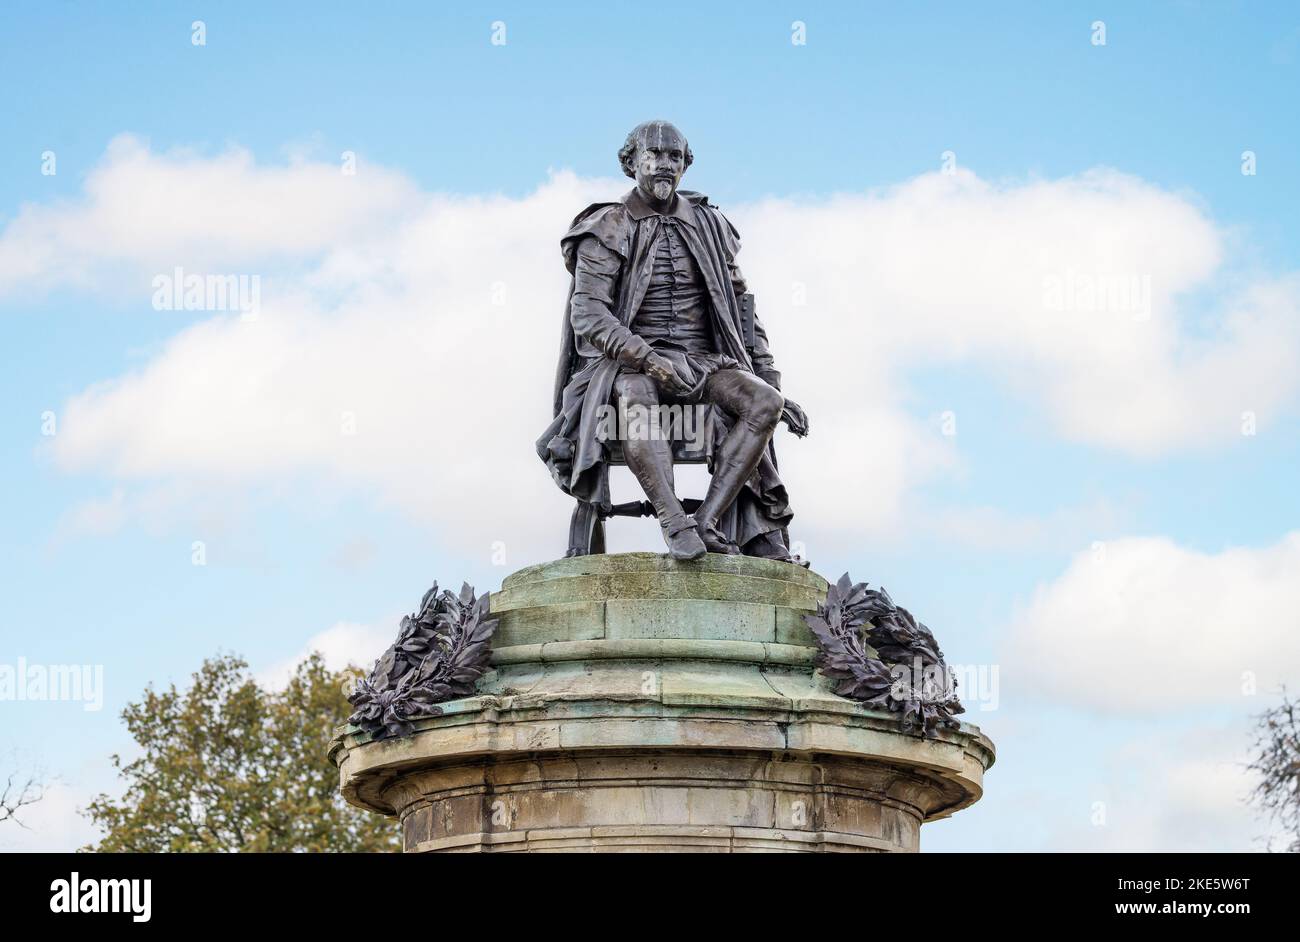 Close up of statue of William Shakespeare, centre piece of the Gower Memorial n Bancroft Gardens, Stratford upon Avon, Warwickshire, UK on 8 November Stock Photo